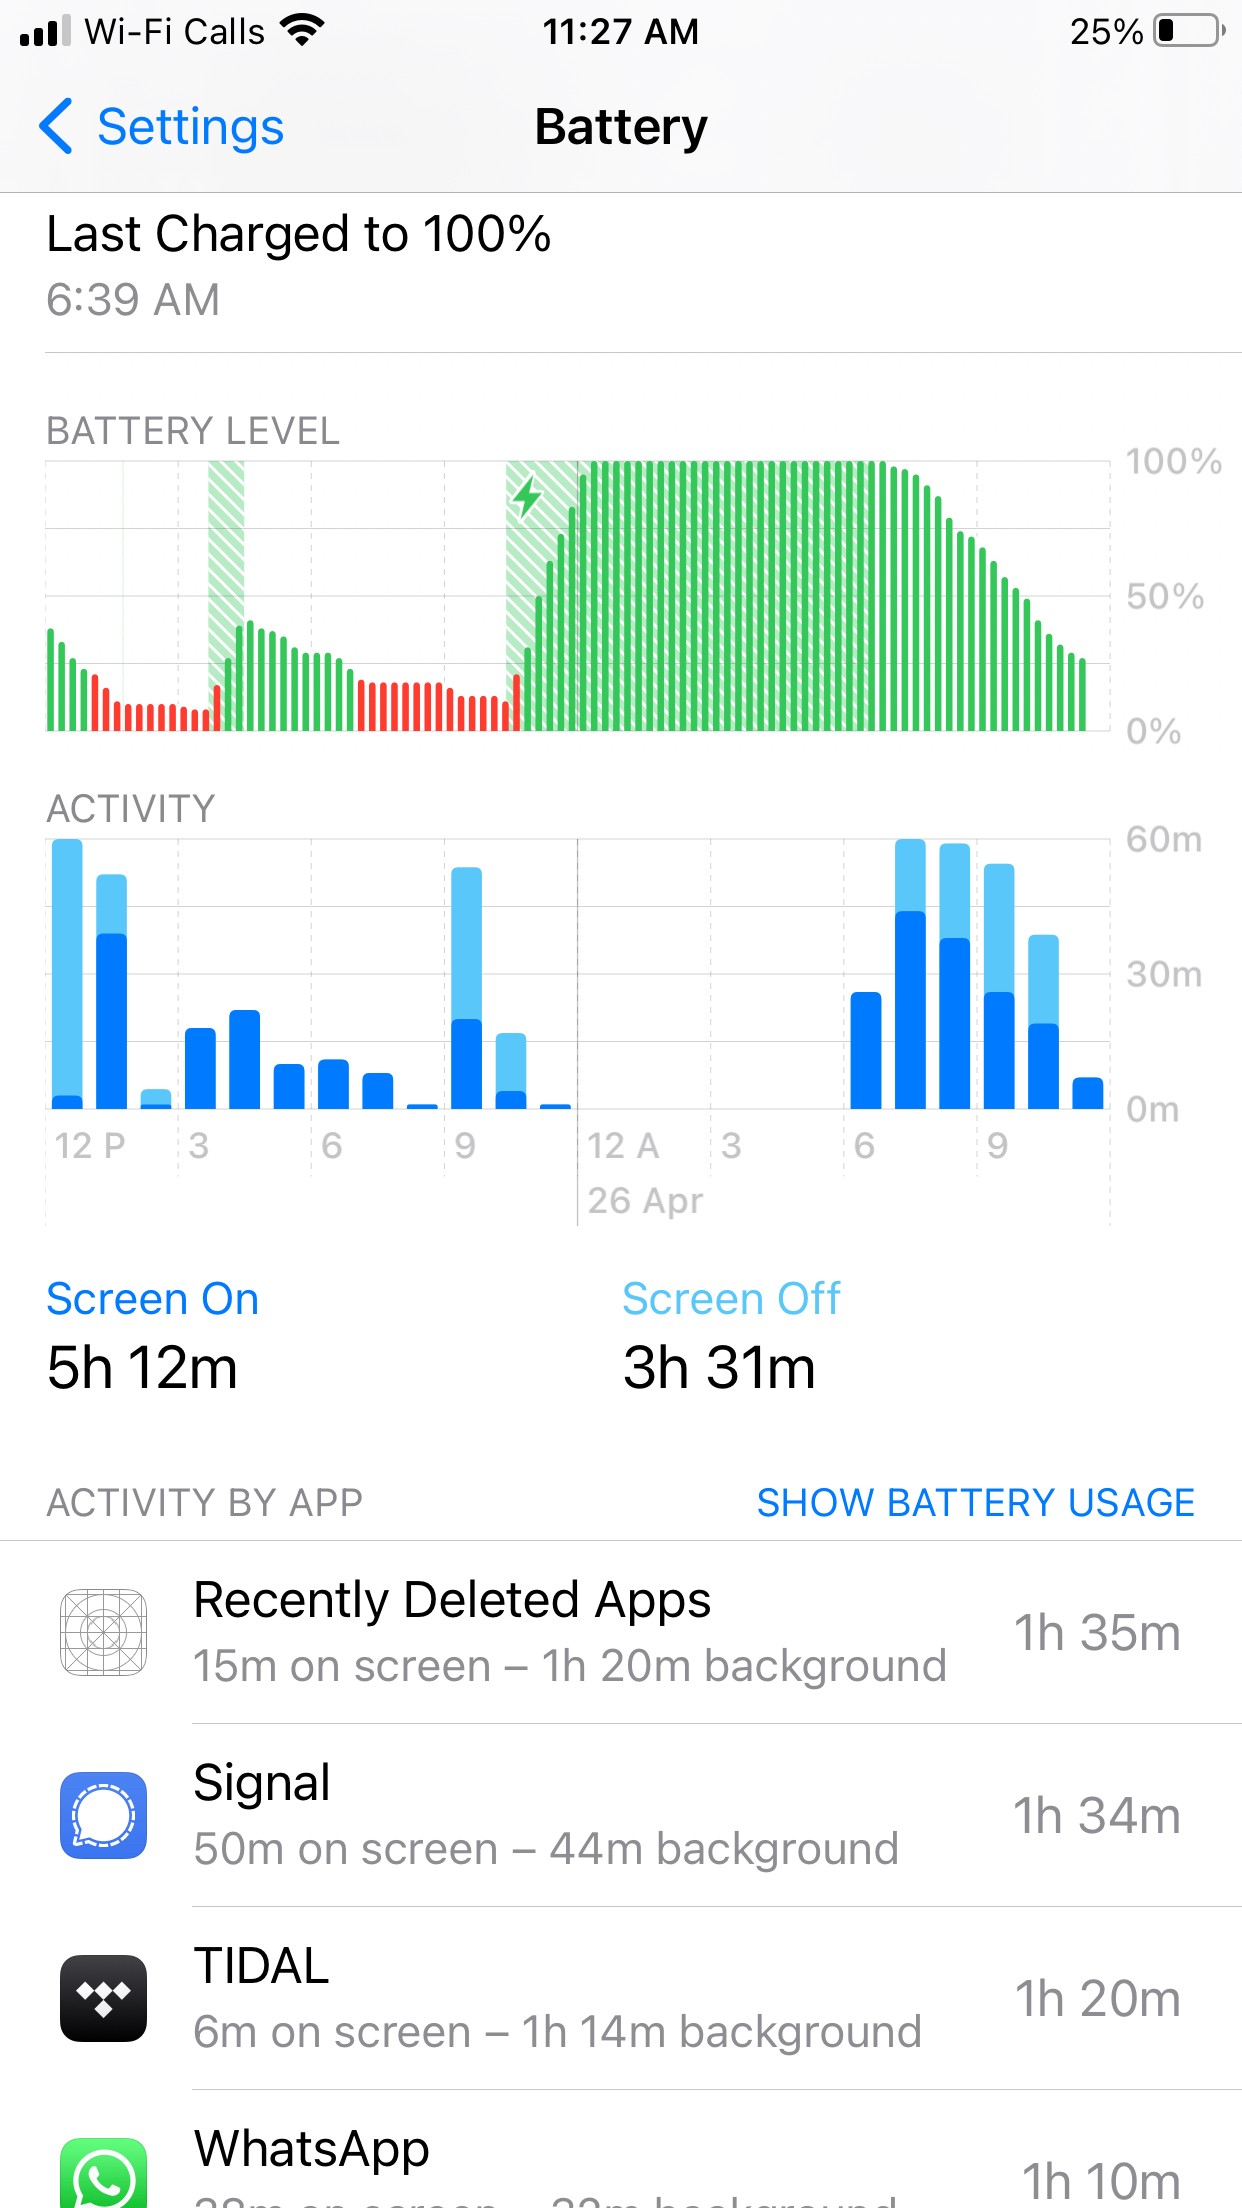 apps running in background drain battery … - Apple Community